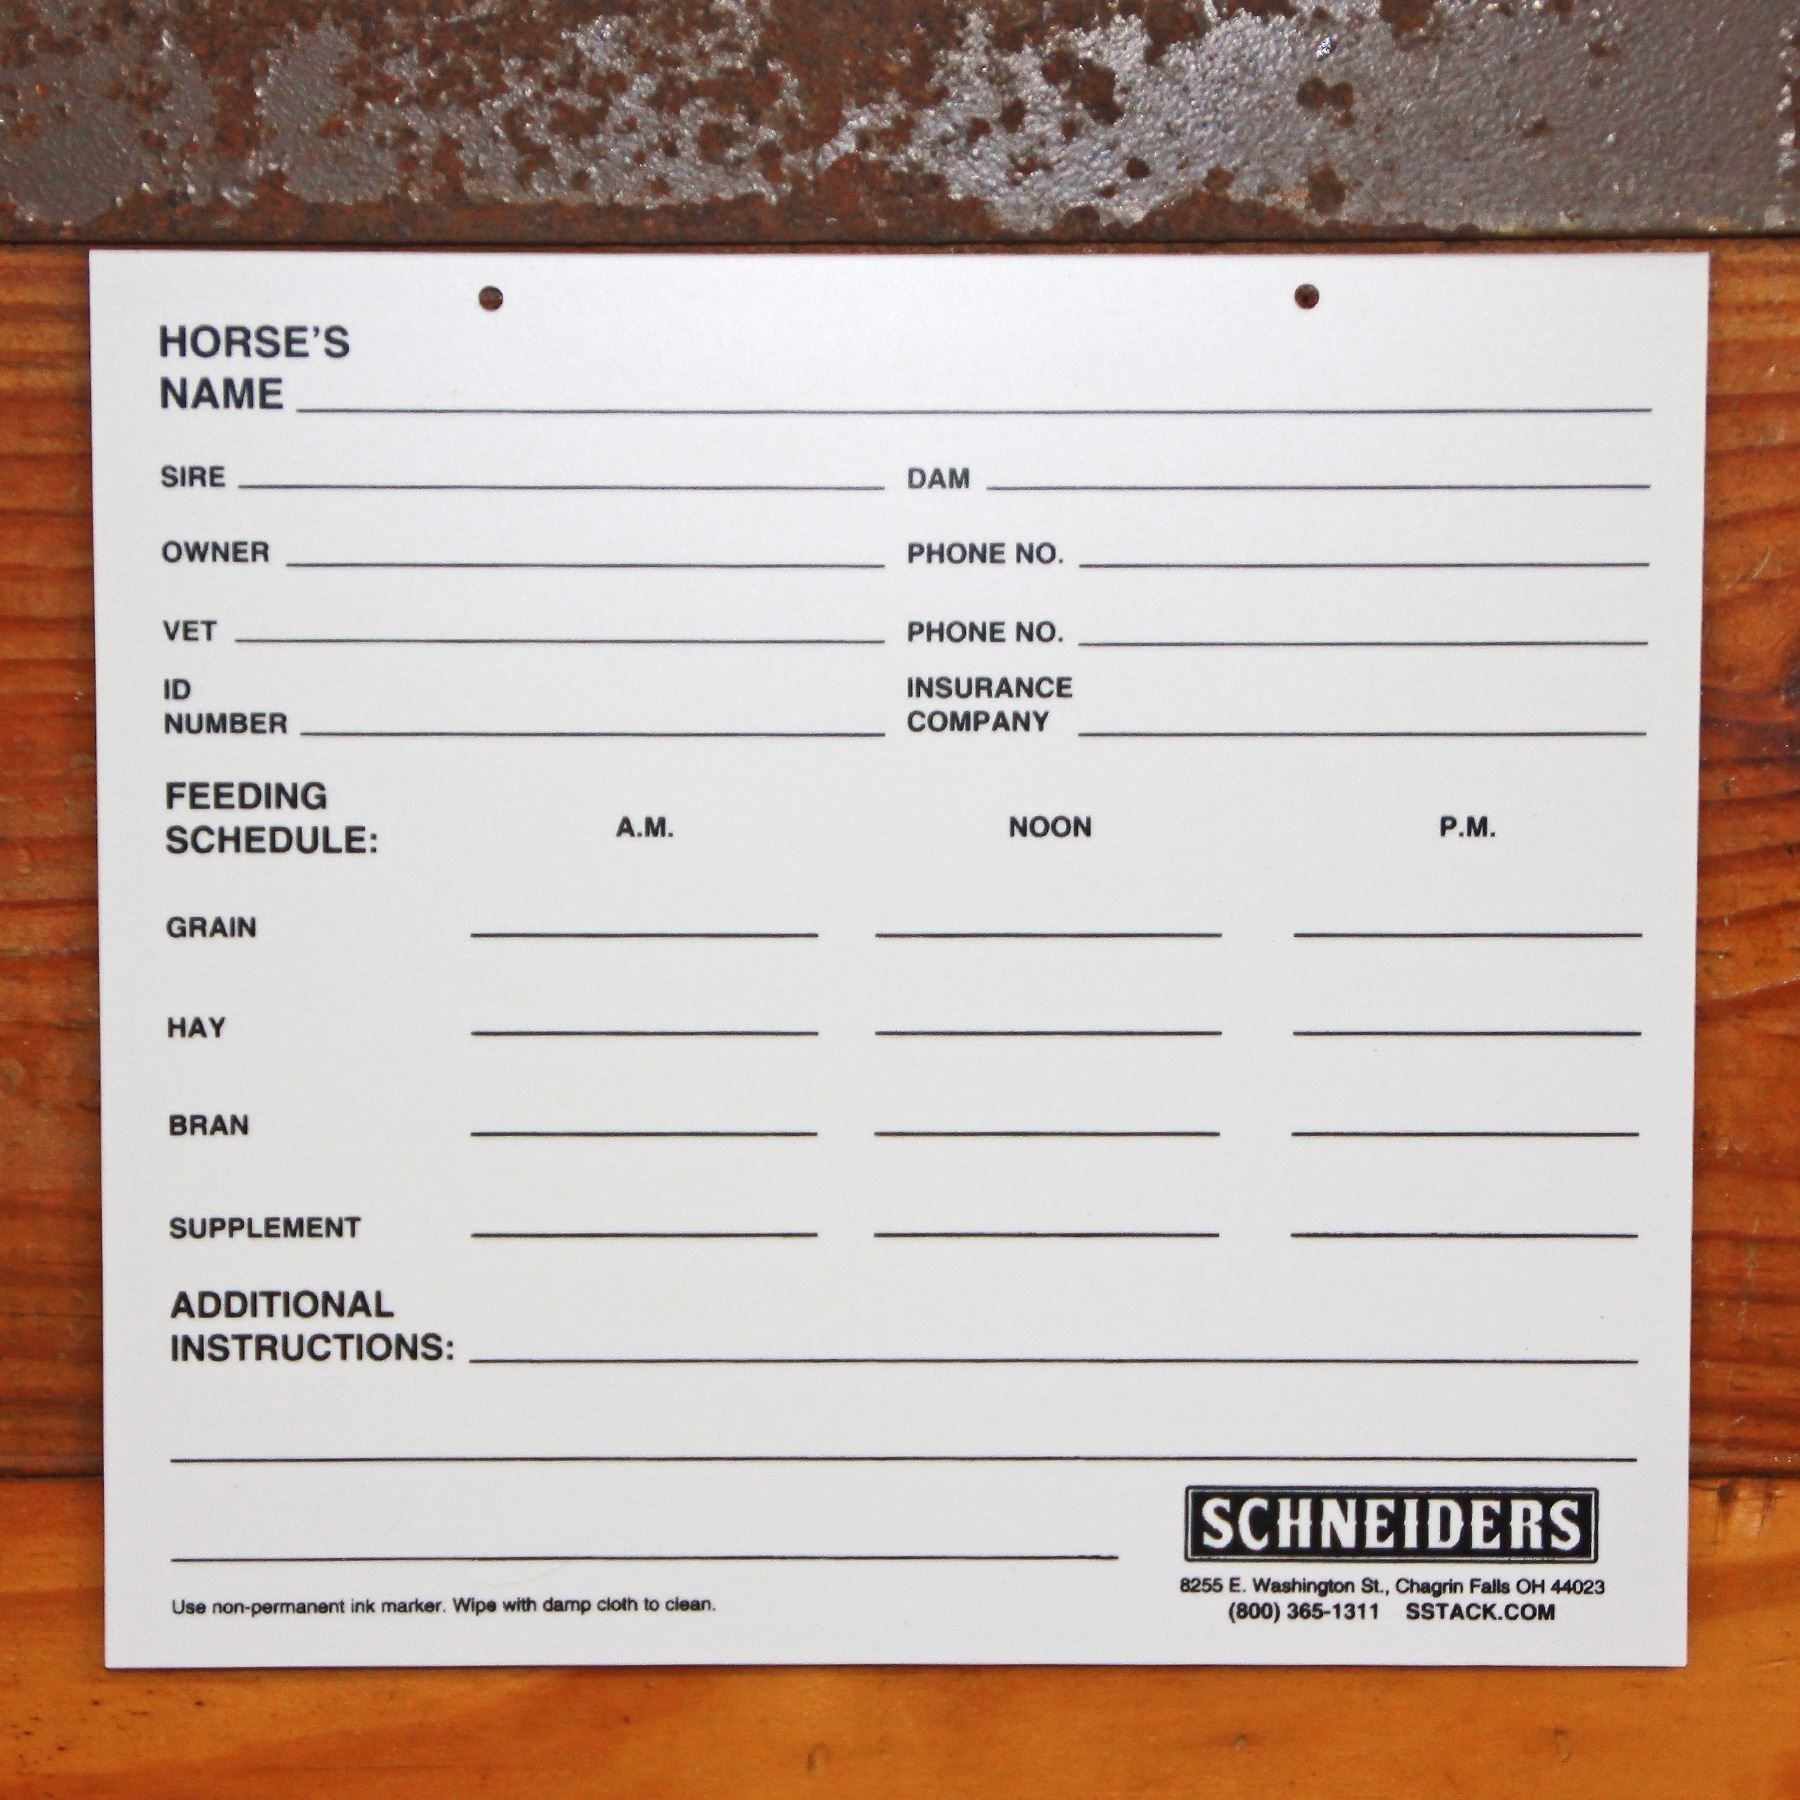 Horse Stall Card Template Intended For Horse Stall Card Template